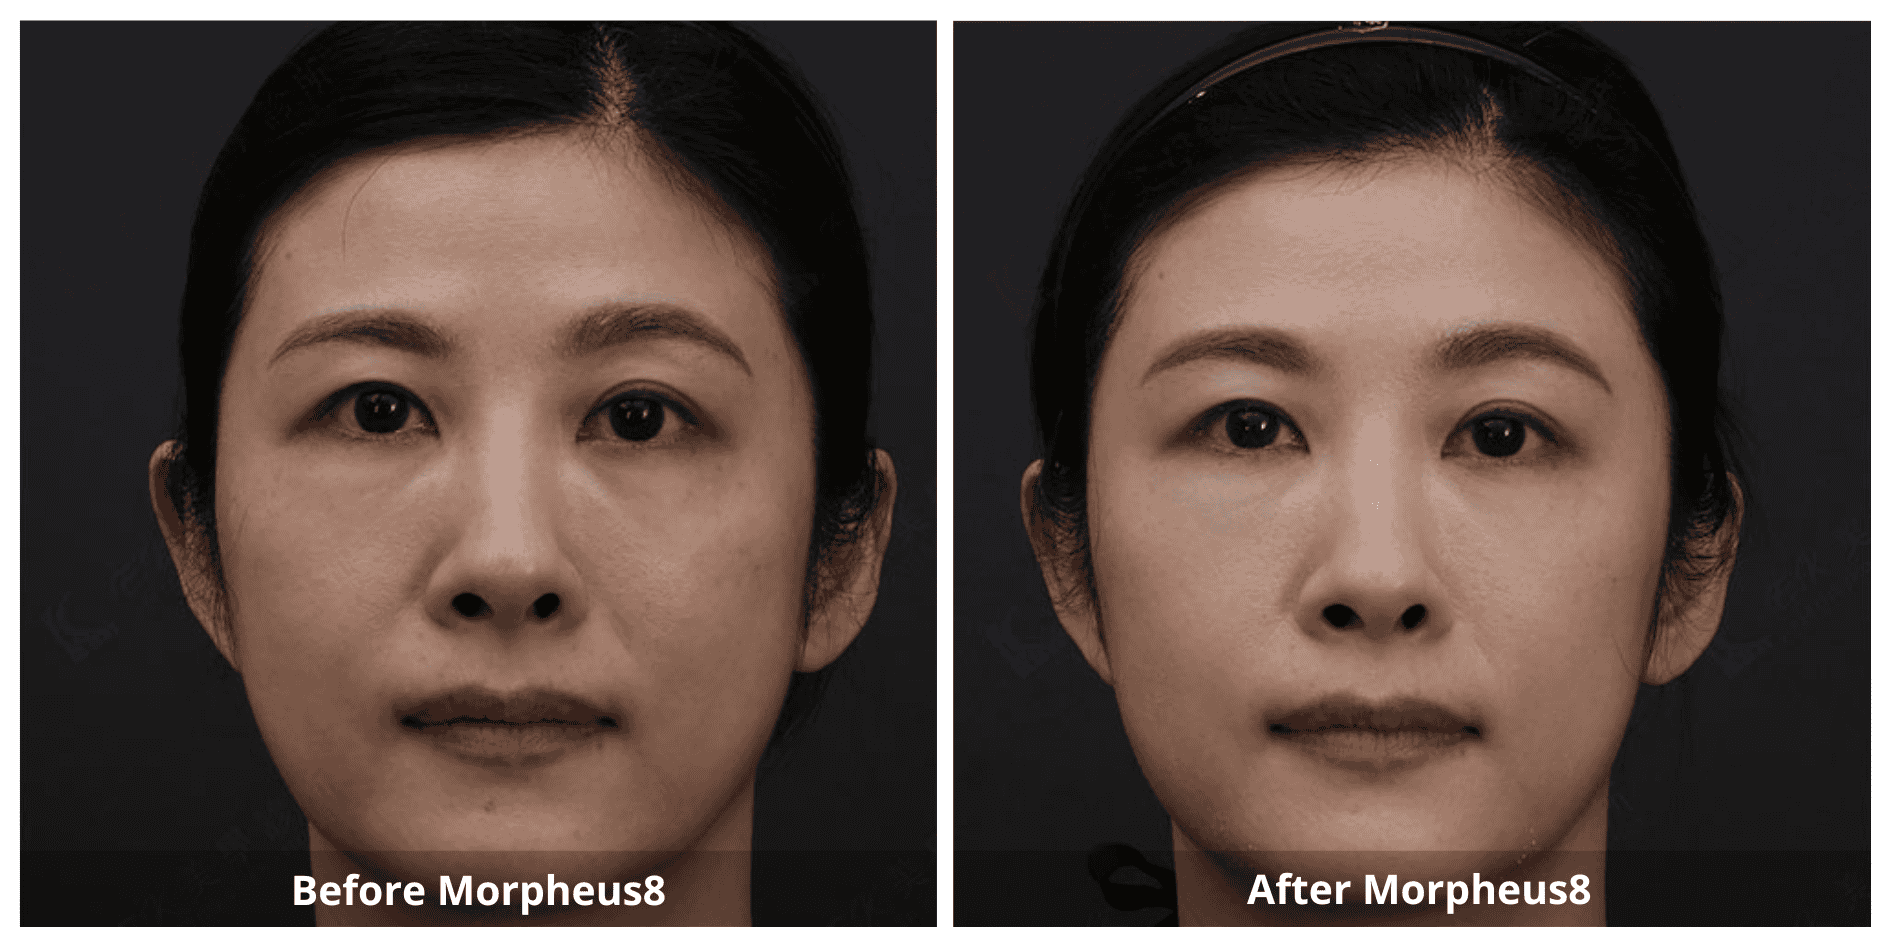 Morpheus8 Skin Resurfacing Treatment Before and After photo